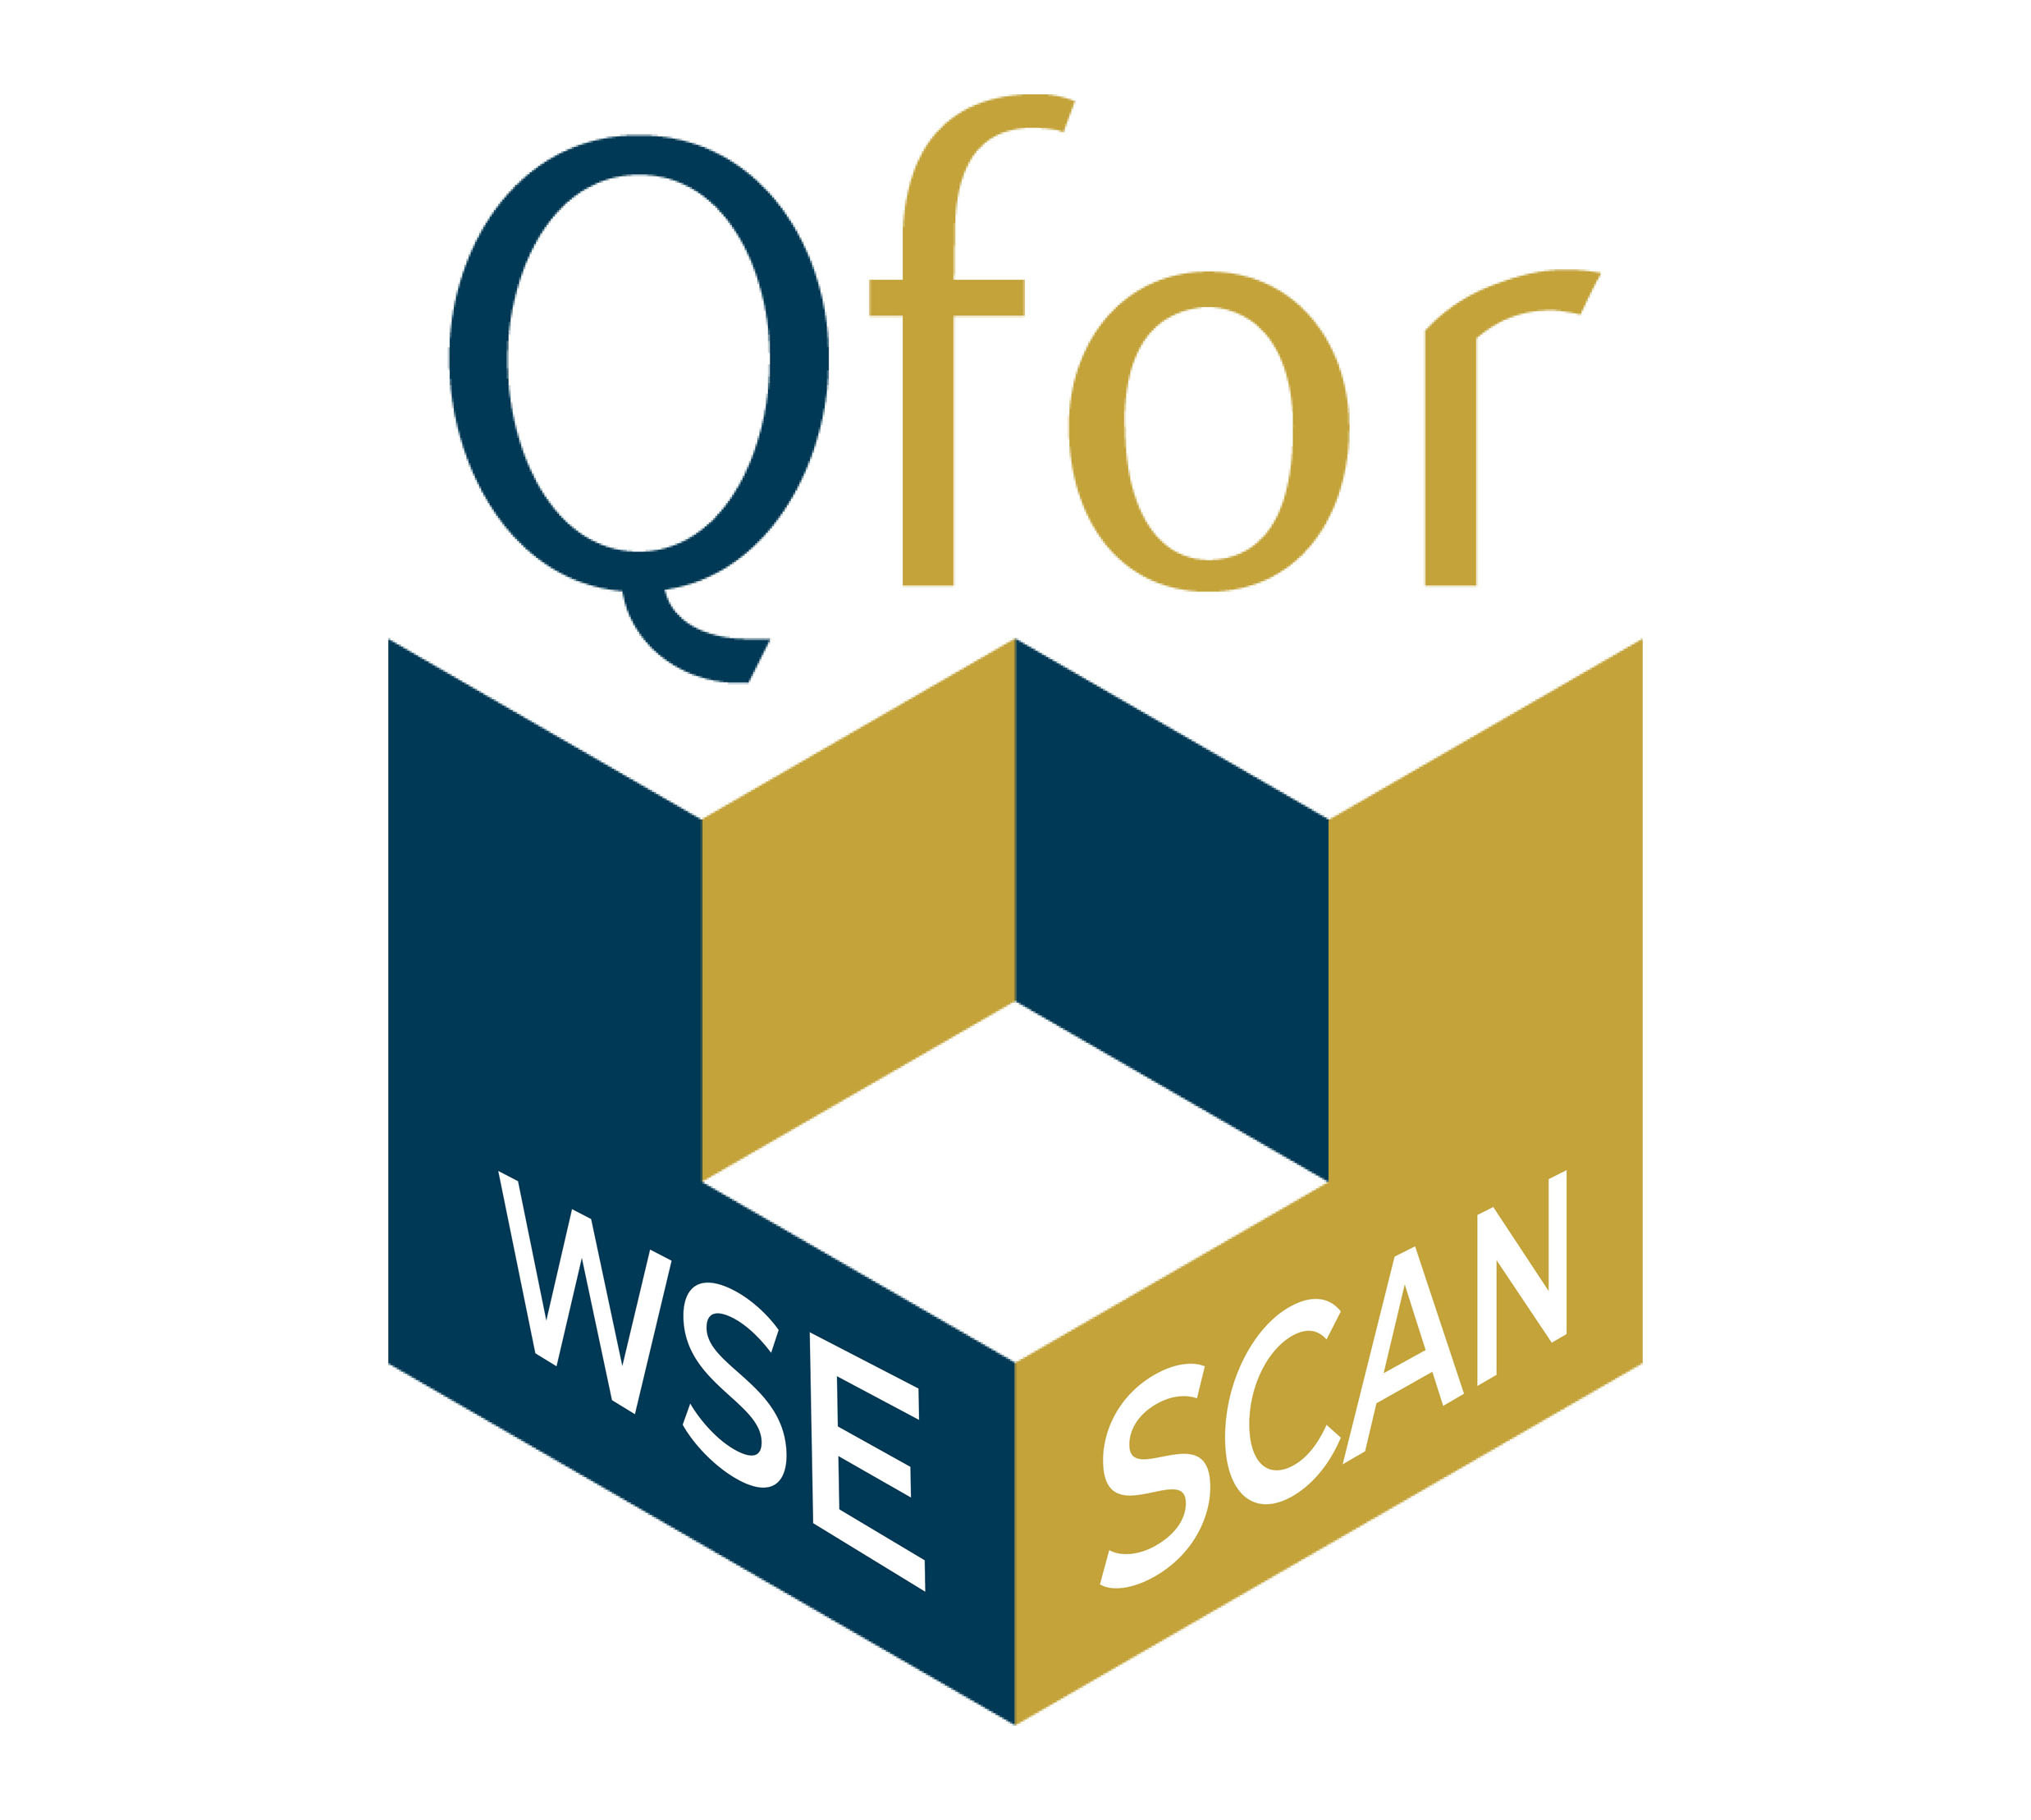 qfor-wse-scan-perspectivejpg1.jpg